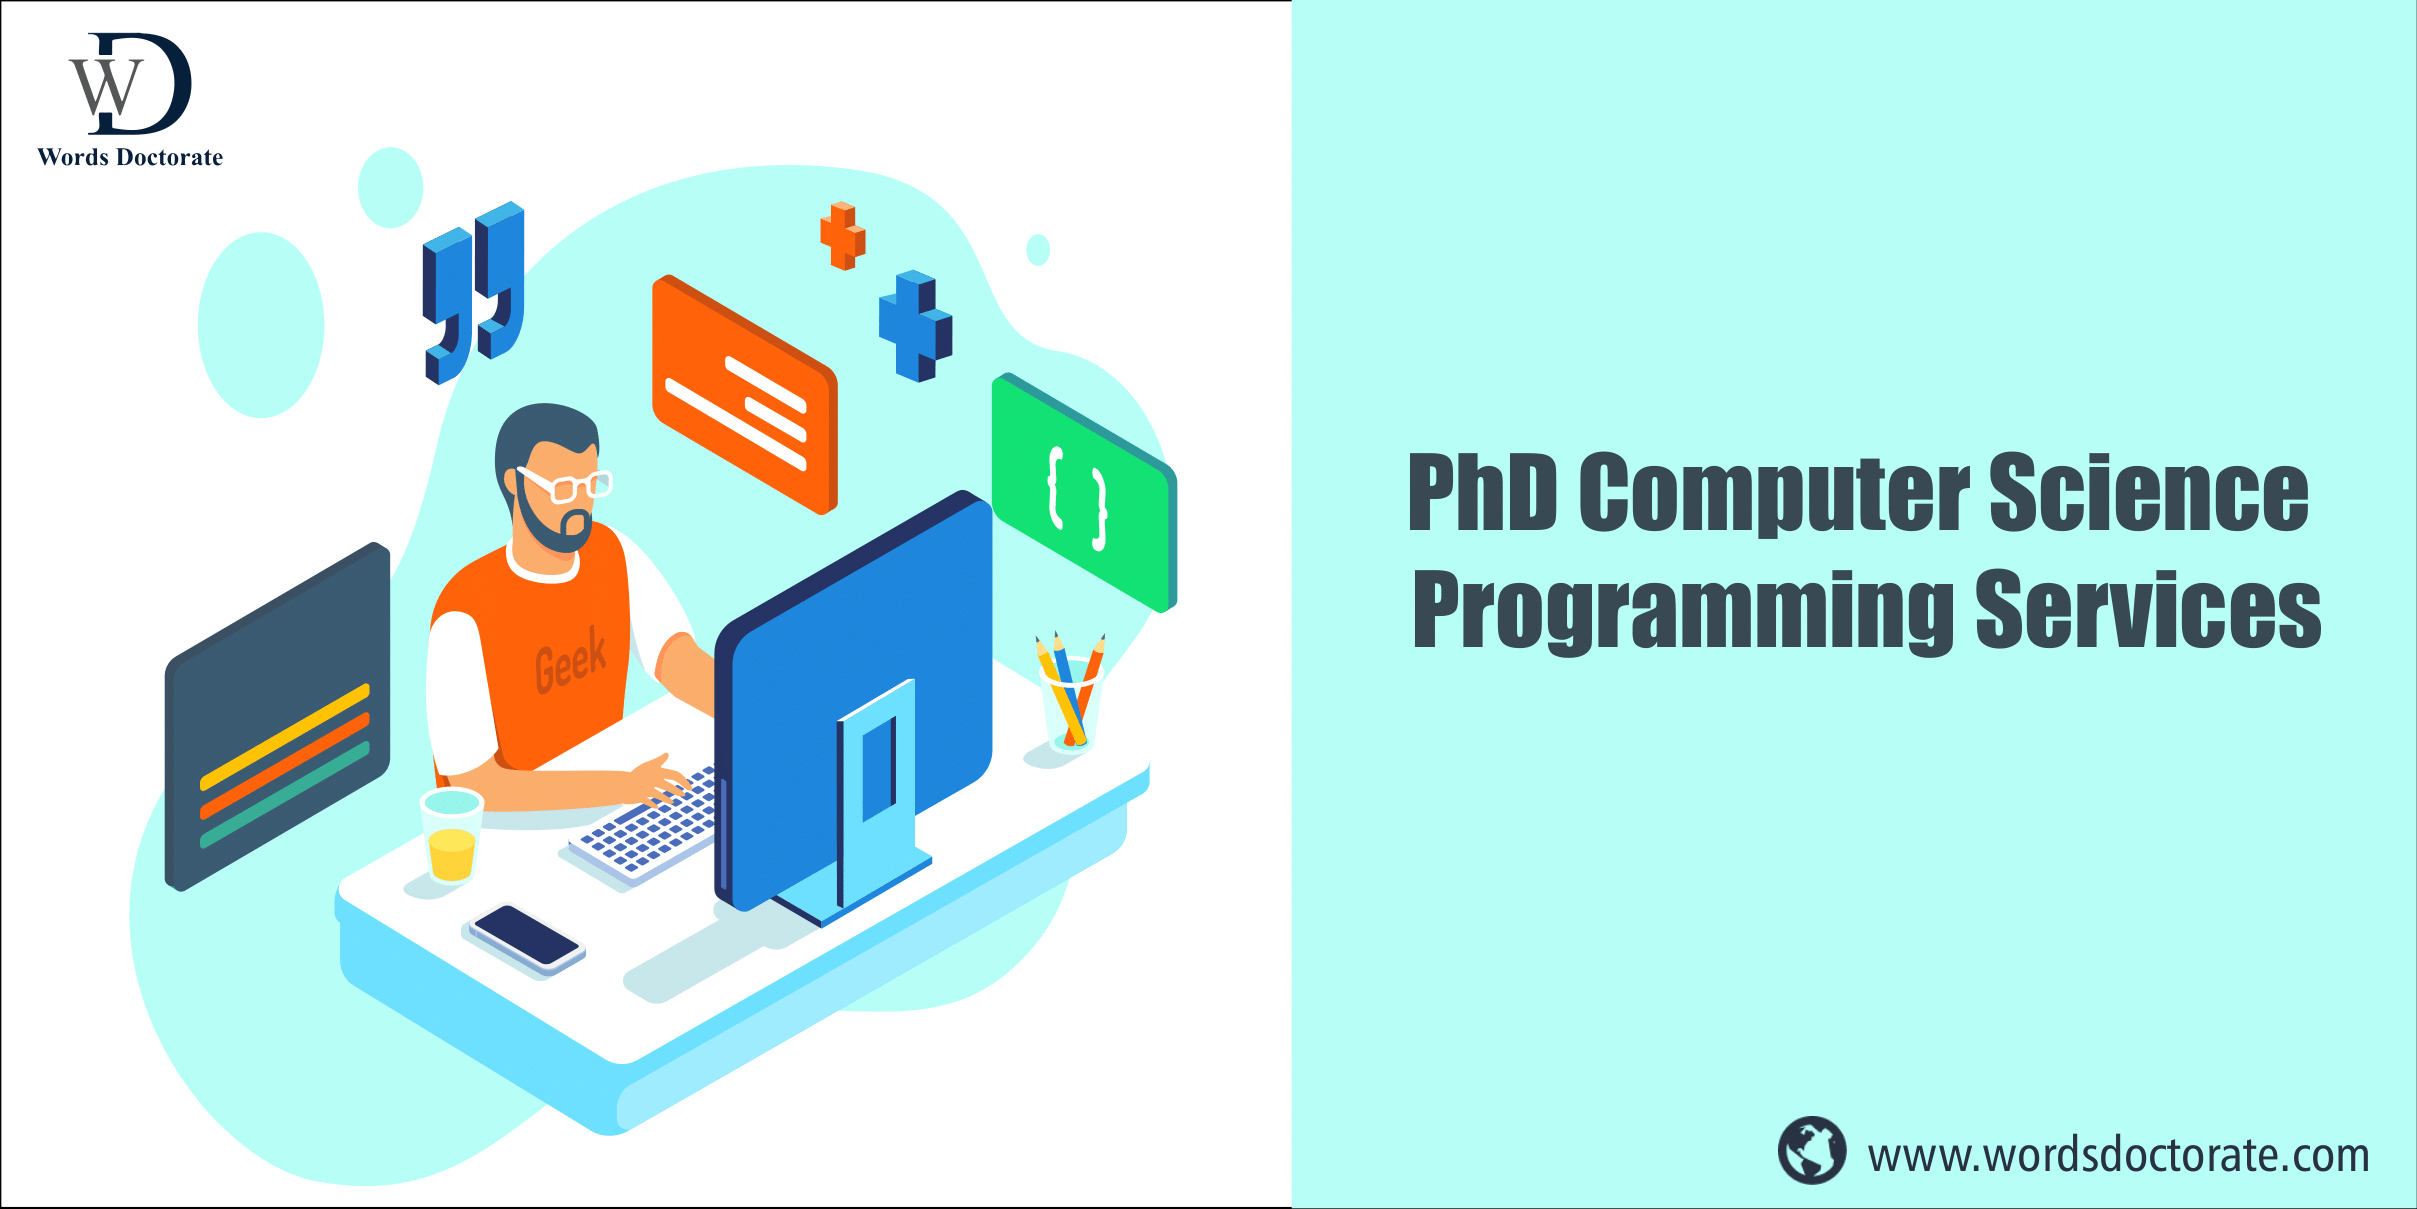 PhD Computer Science Programming Services